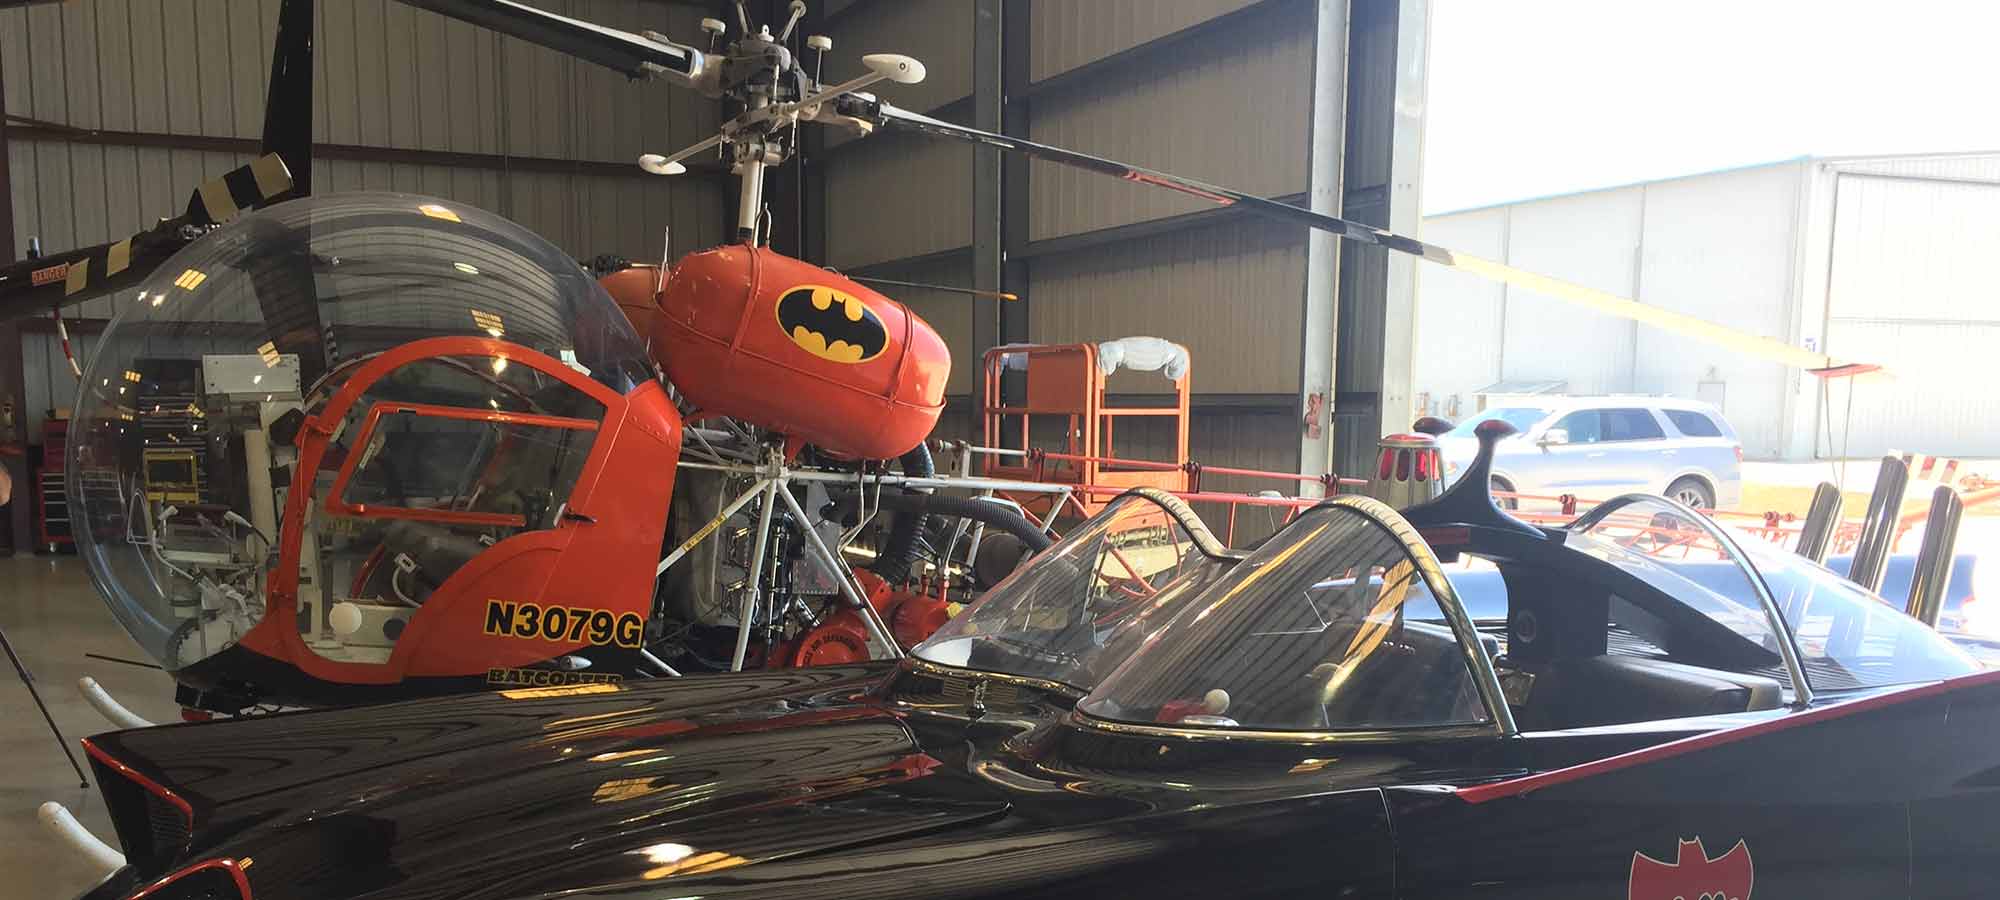 Up Close and Personal with the Original Batcopter